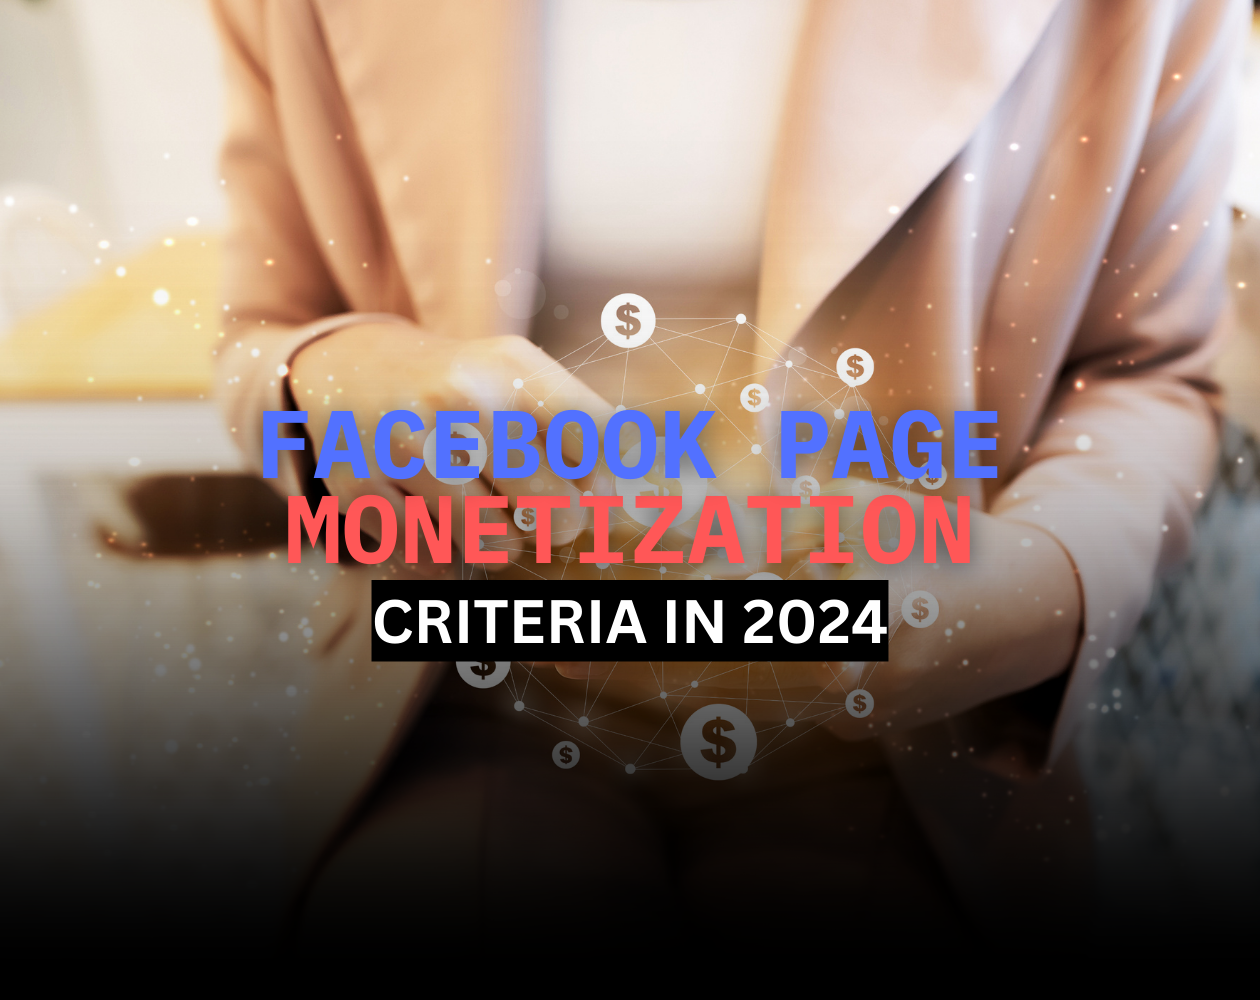 Are You Eligible? Facebook Page Monetization Criteria in 2024   Discover the latest eligibility requirements for Facebook page monetization in 2024. Learn how to qualify and start earning today!